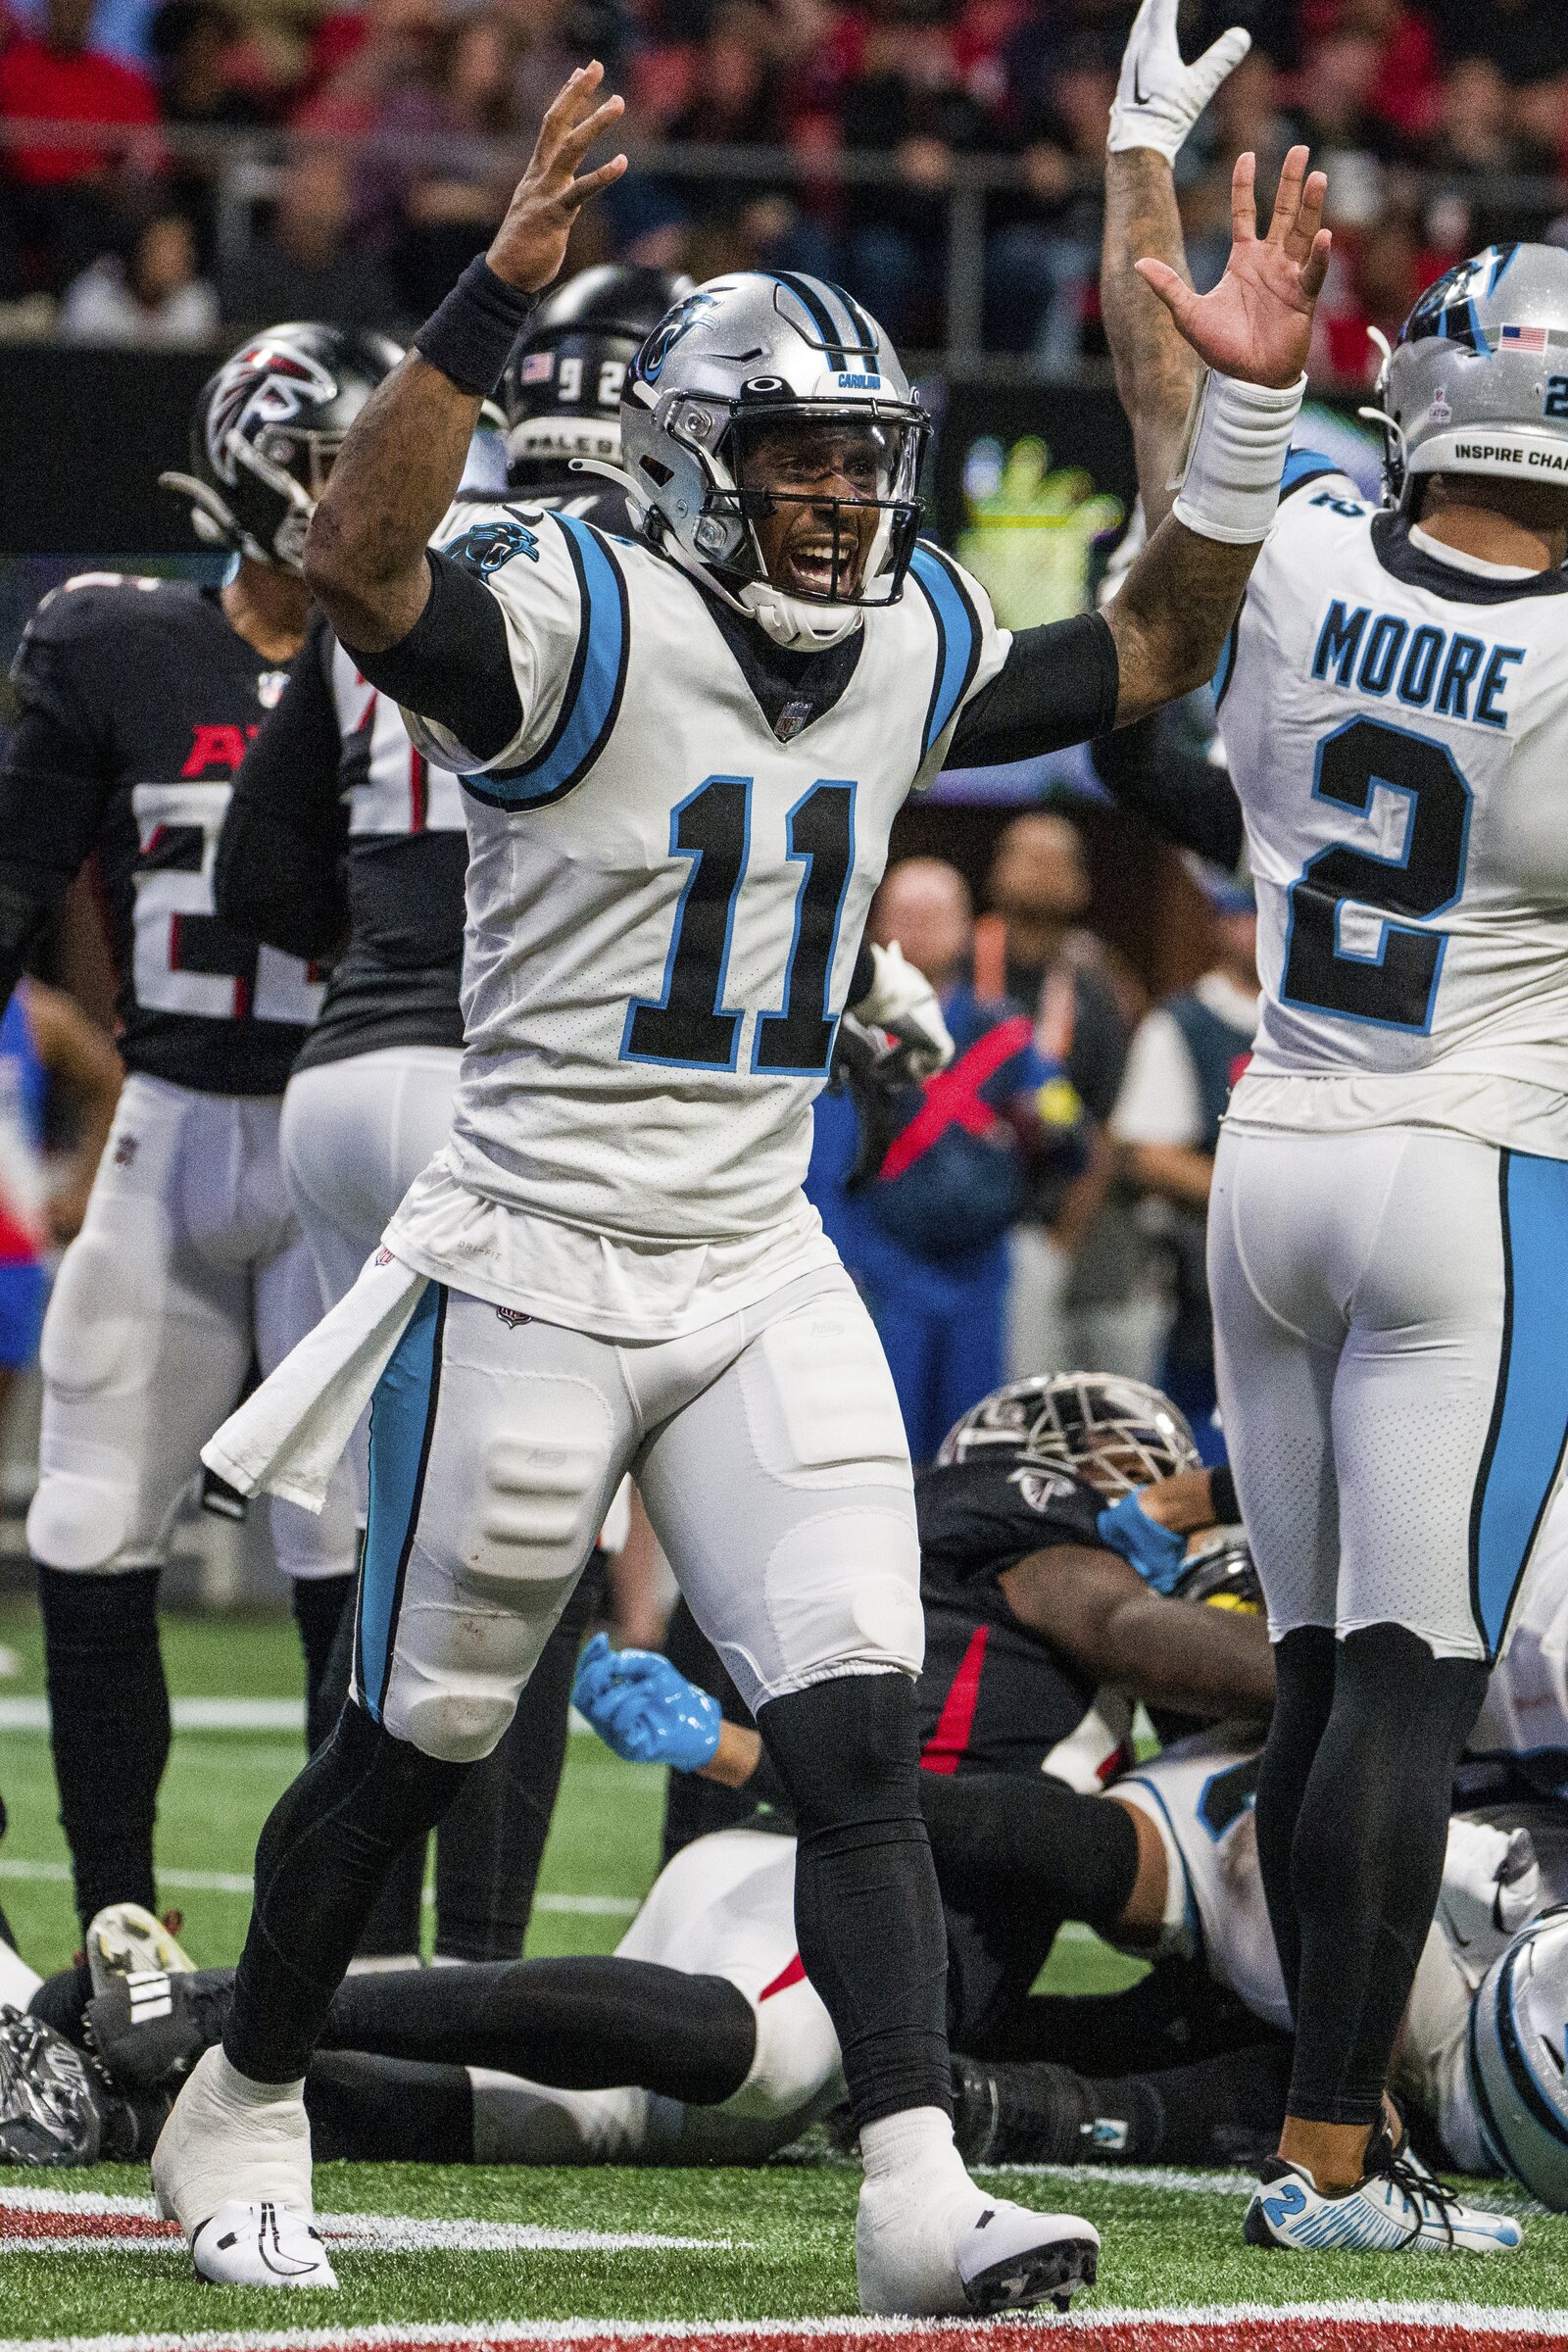 Walker, Panthers look to bounce back vs 1st-place Falcons